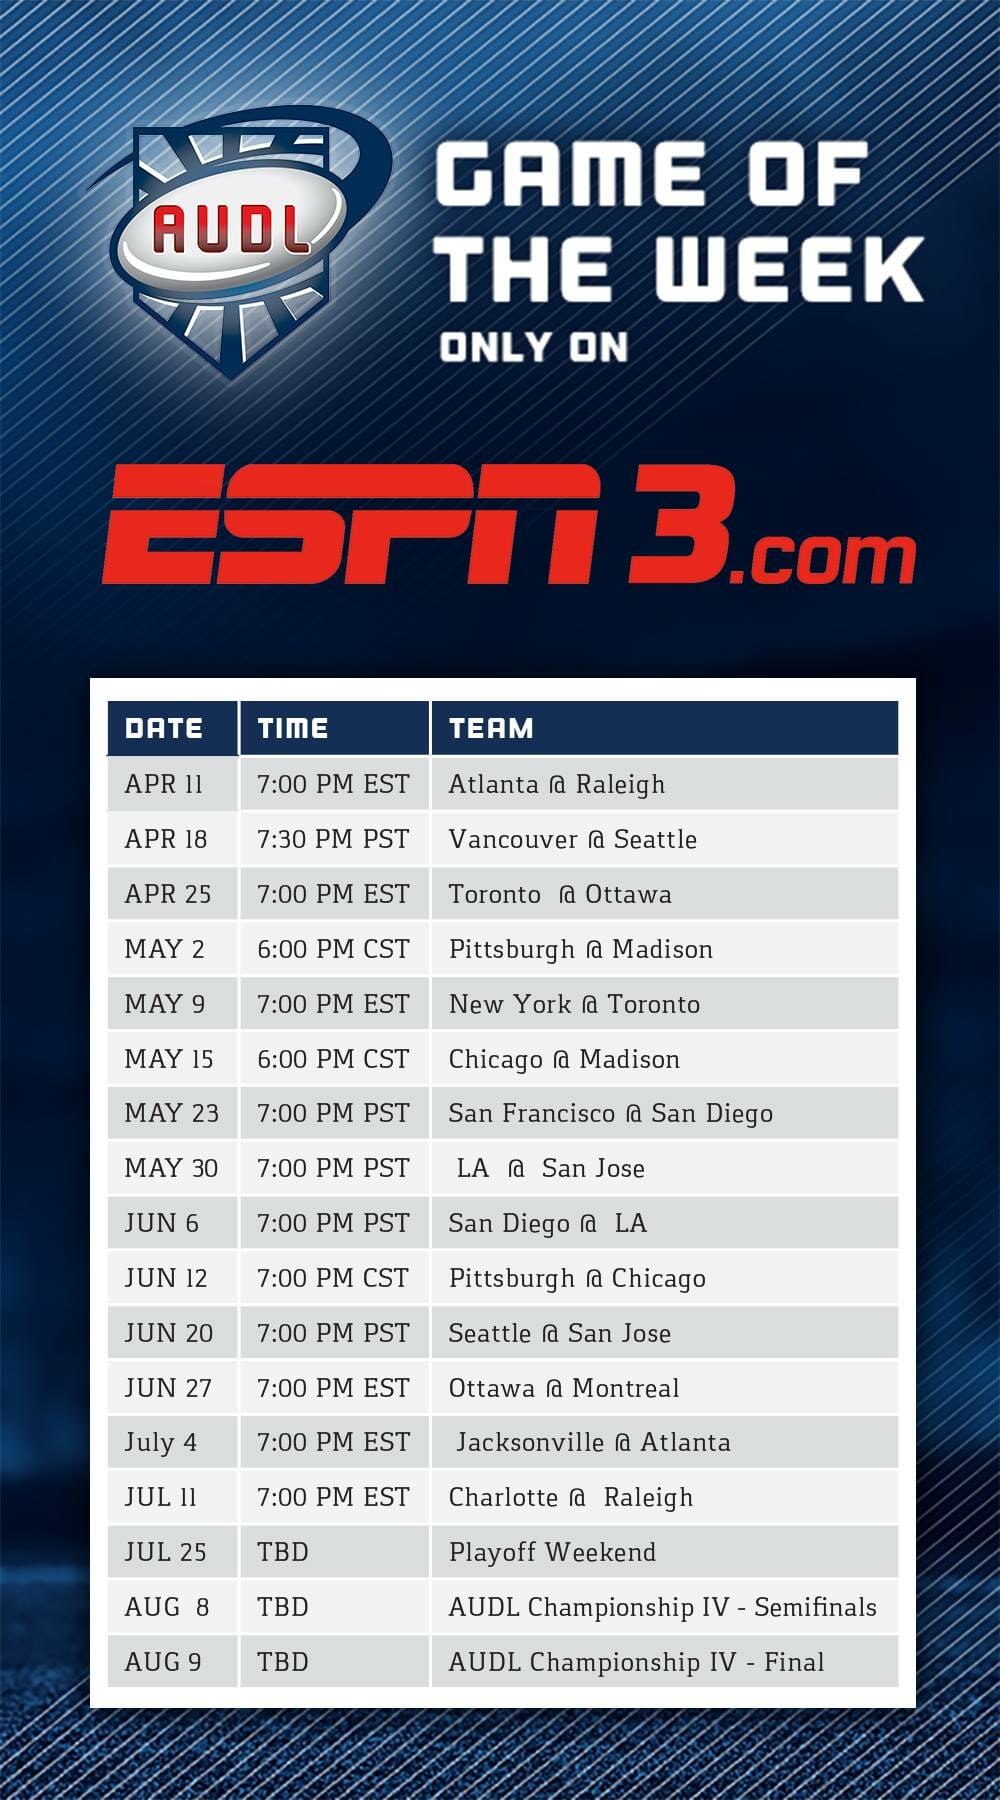 AUDL ESPN3 Game Of The Week